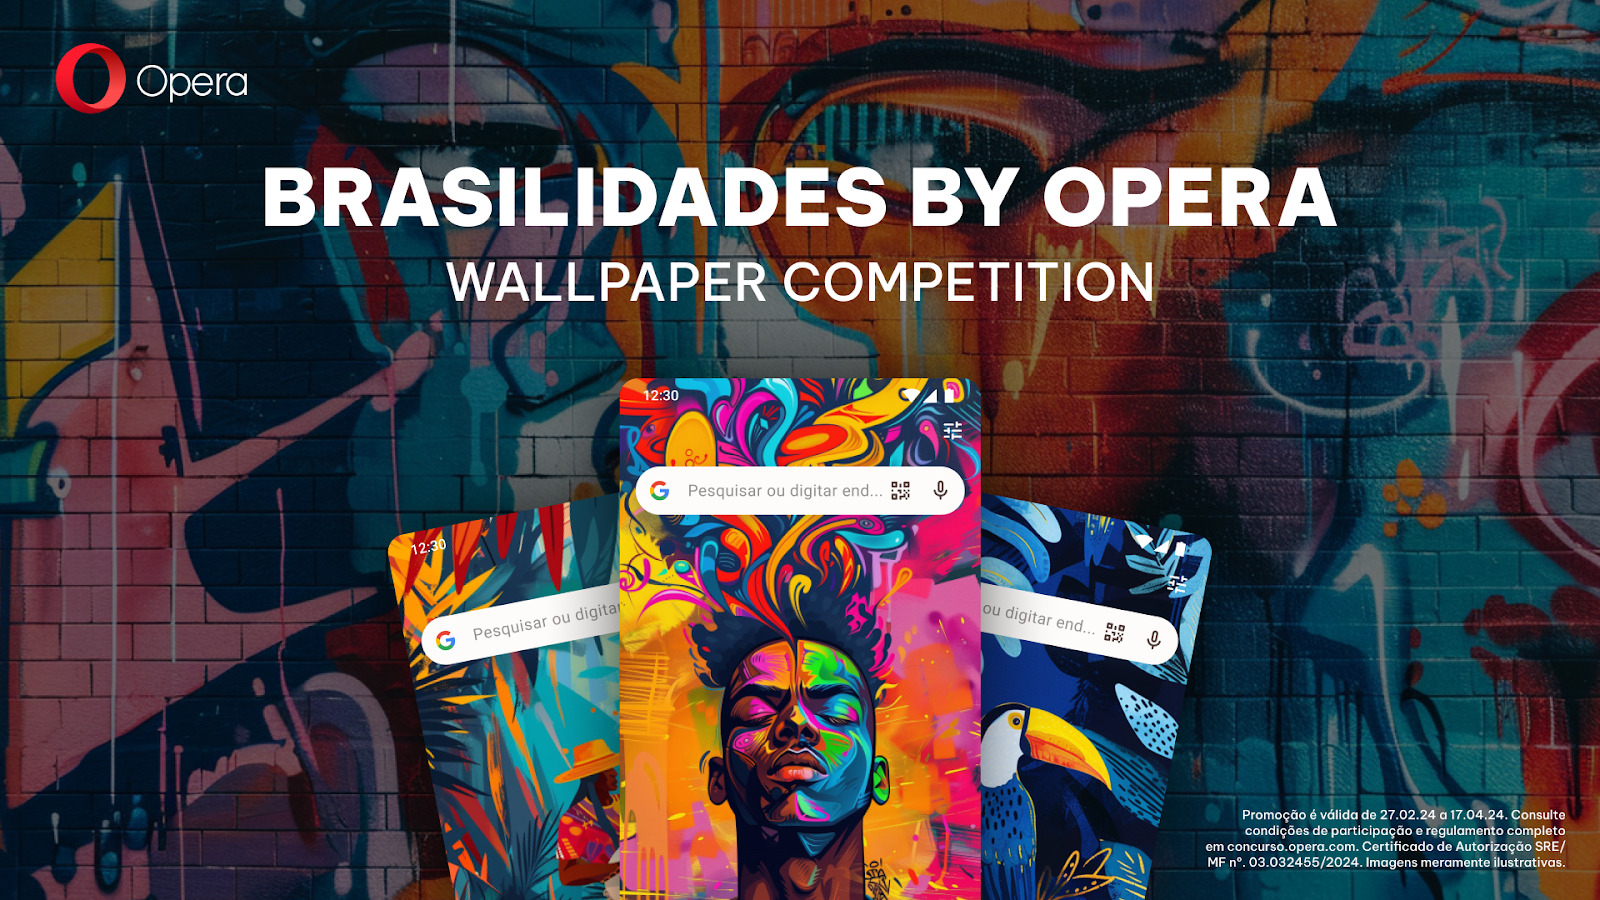 Mobile phones show different wallpapers with different expressions of "Brasilidades."